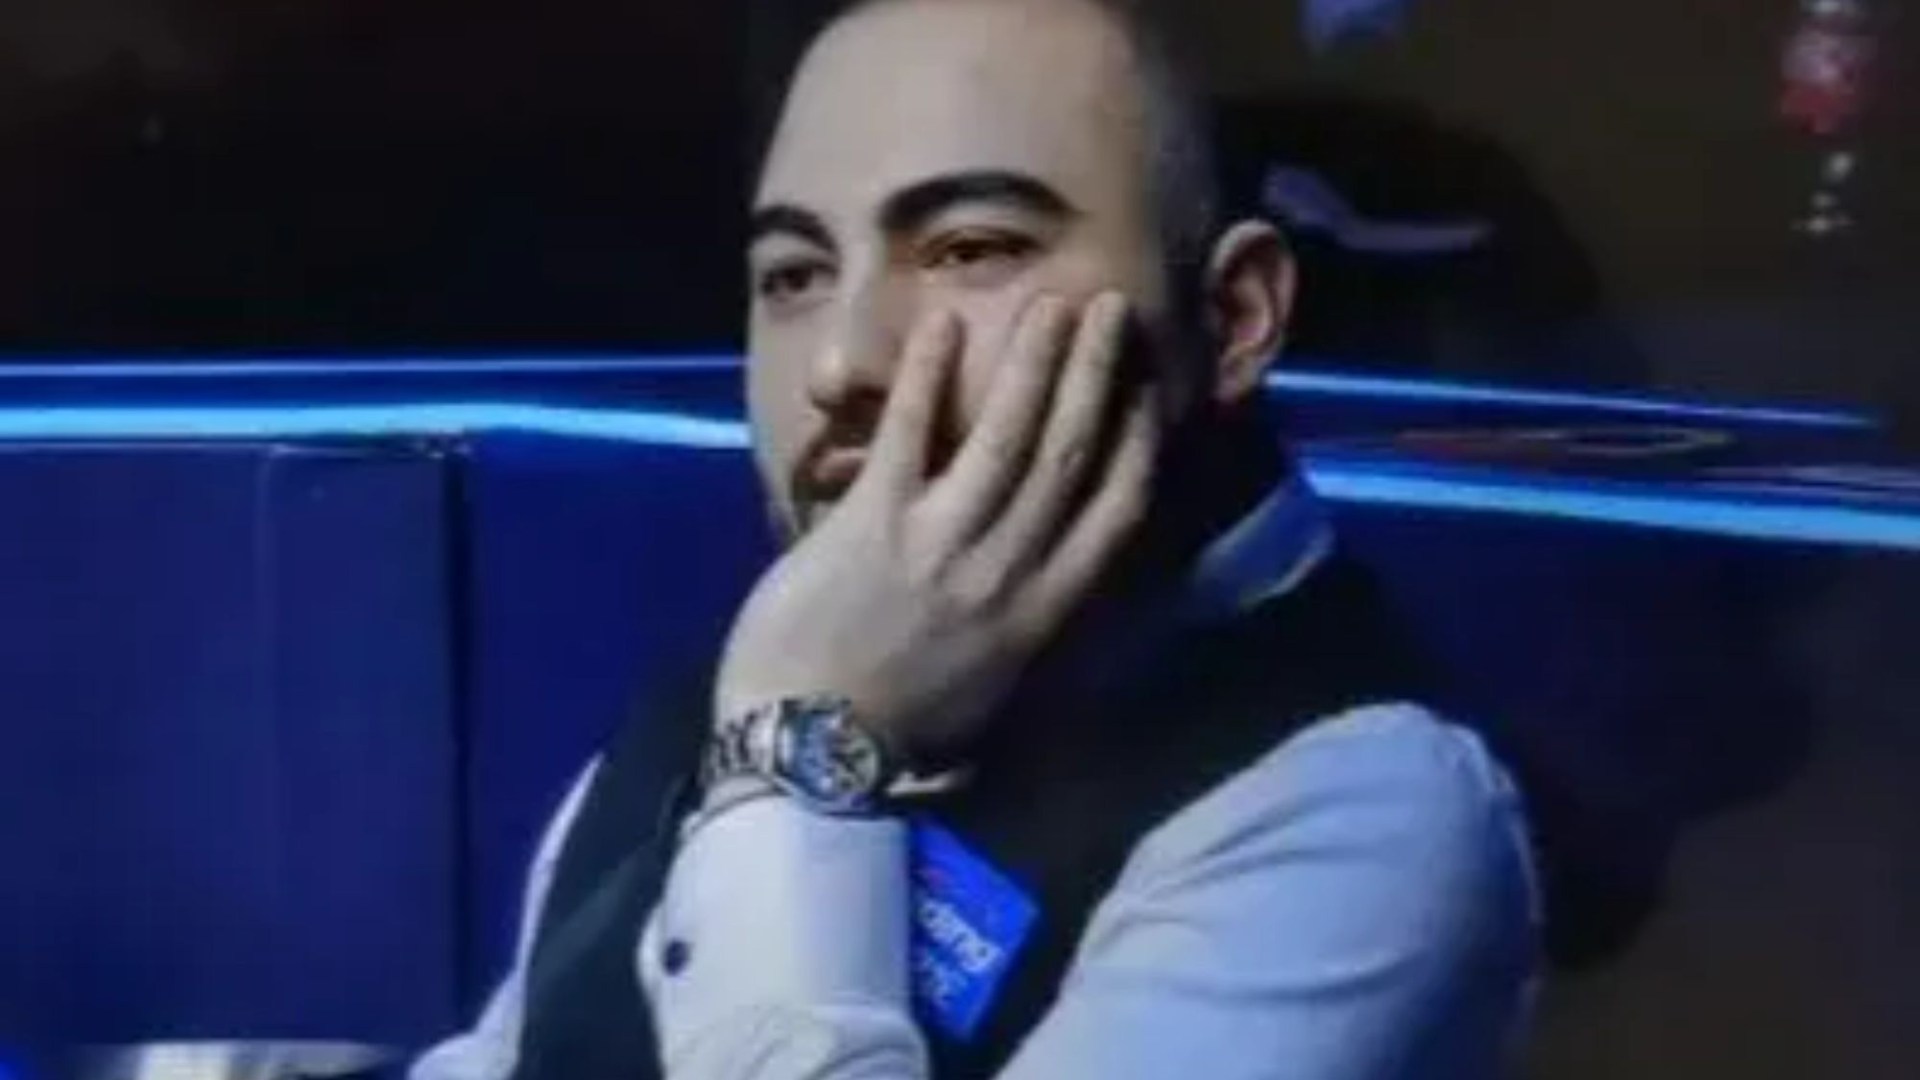 ‘I’ve seen nothing like that,’ cries commentator at snooker star’s error before bouncing back to beat Ronnie O’Sullivan [Video]